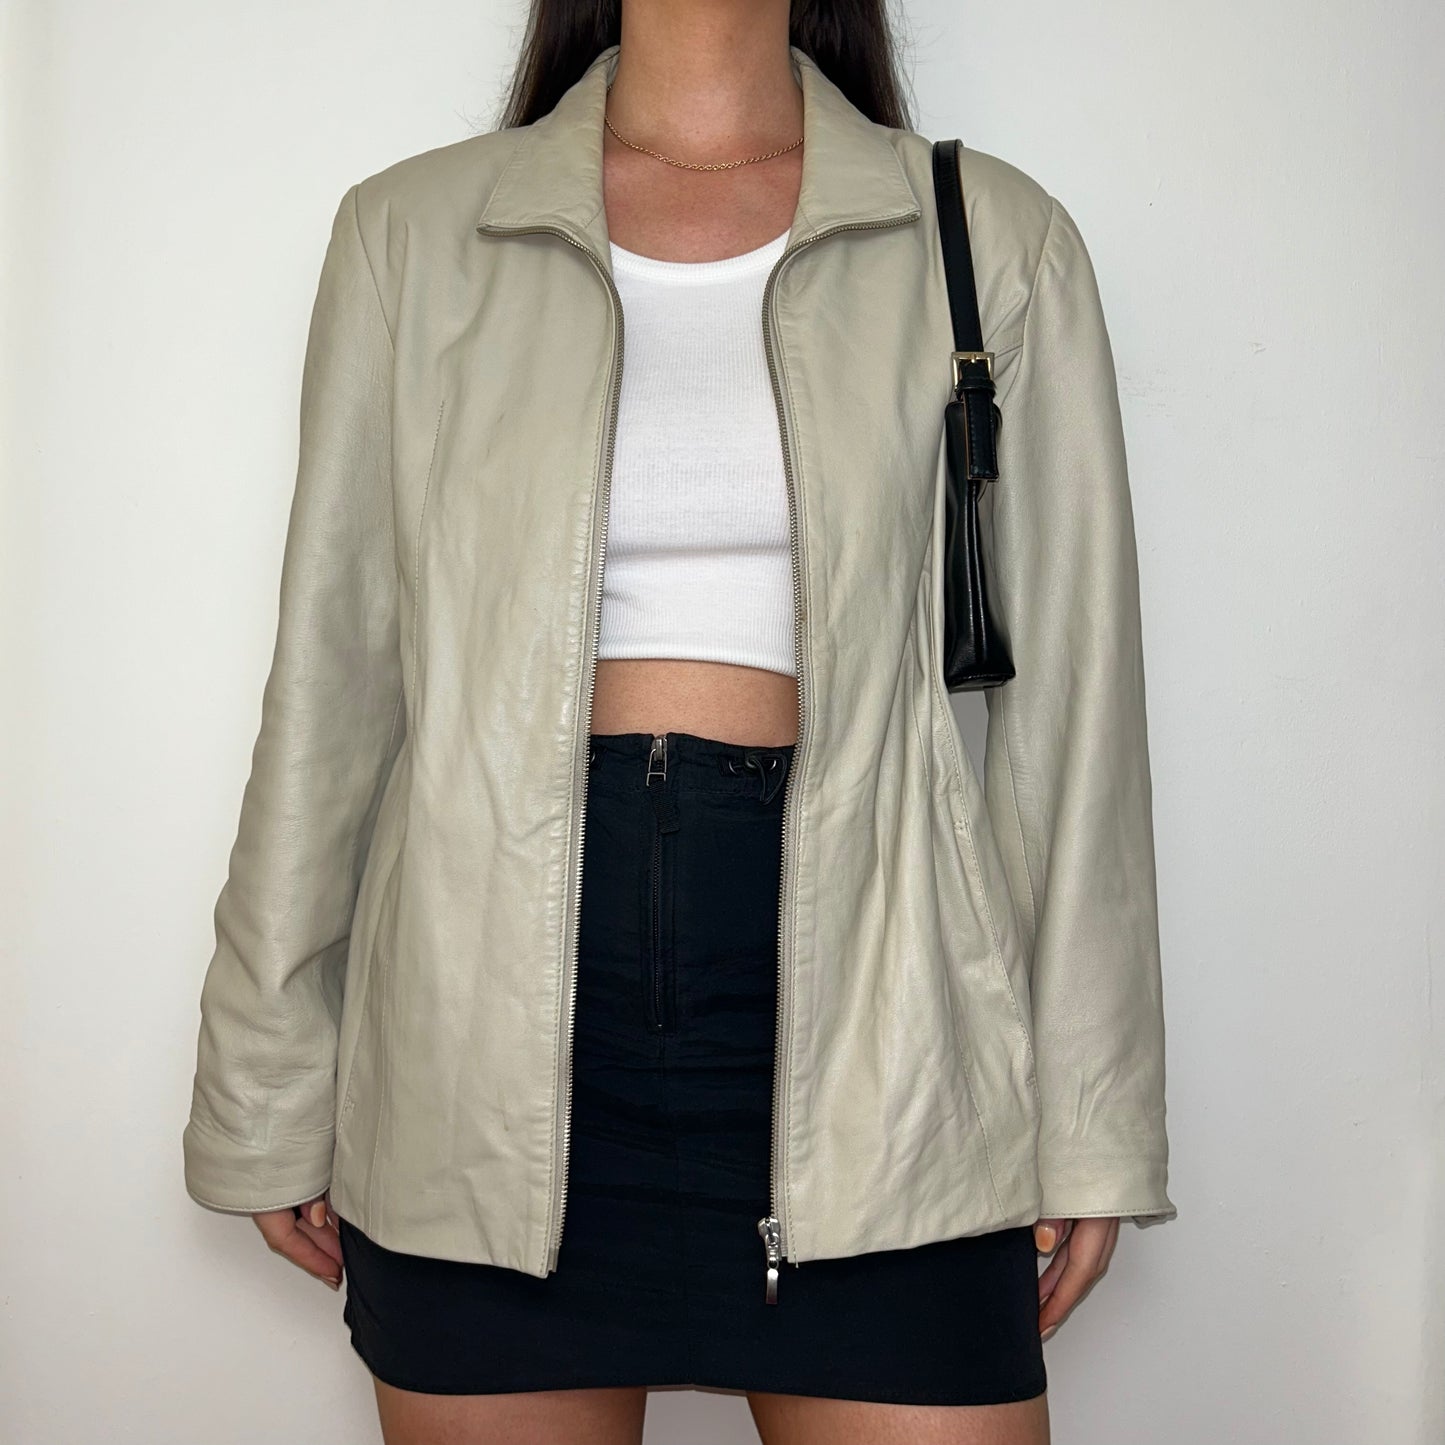 beige leather zip up jacket shown on a model wearing a white crop top and black skirt with a black shoulder bag